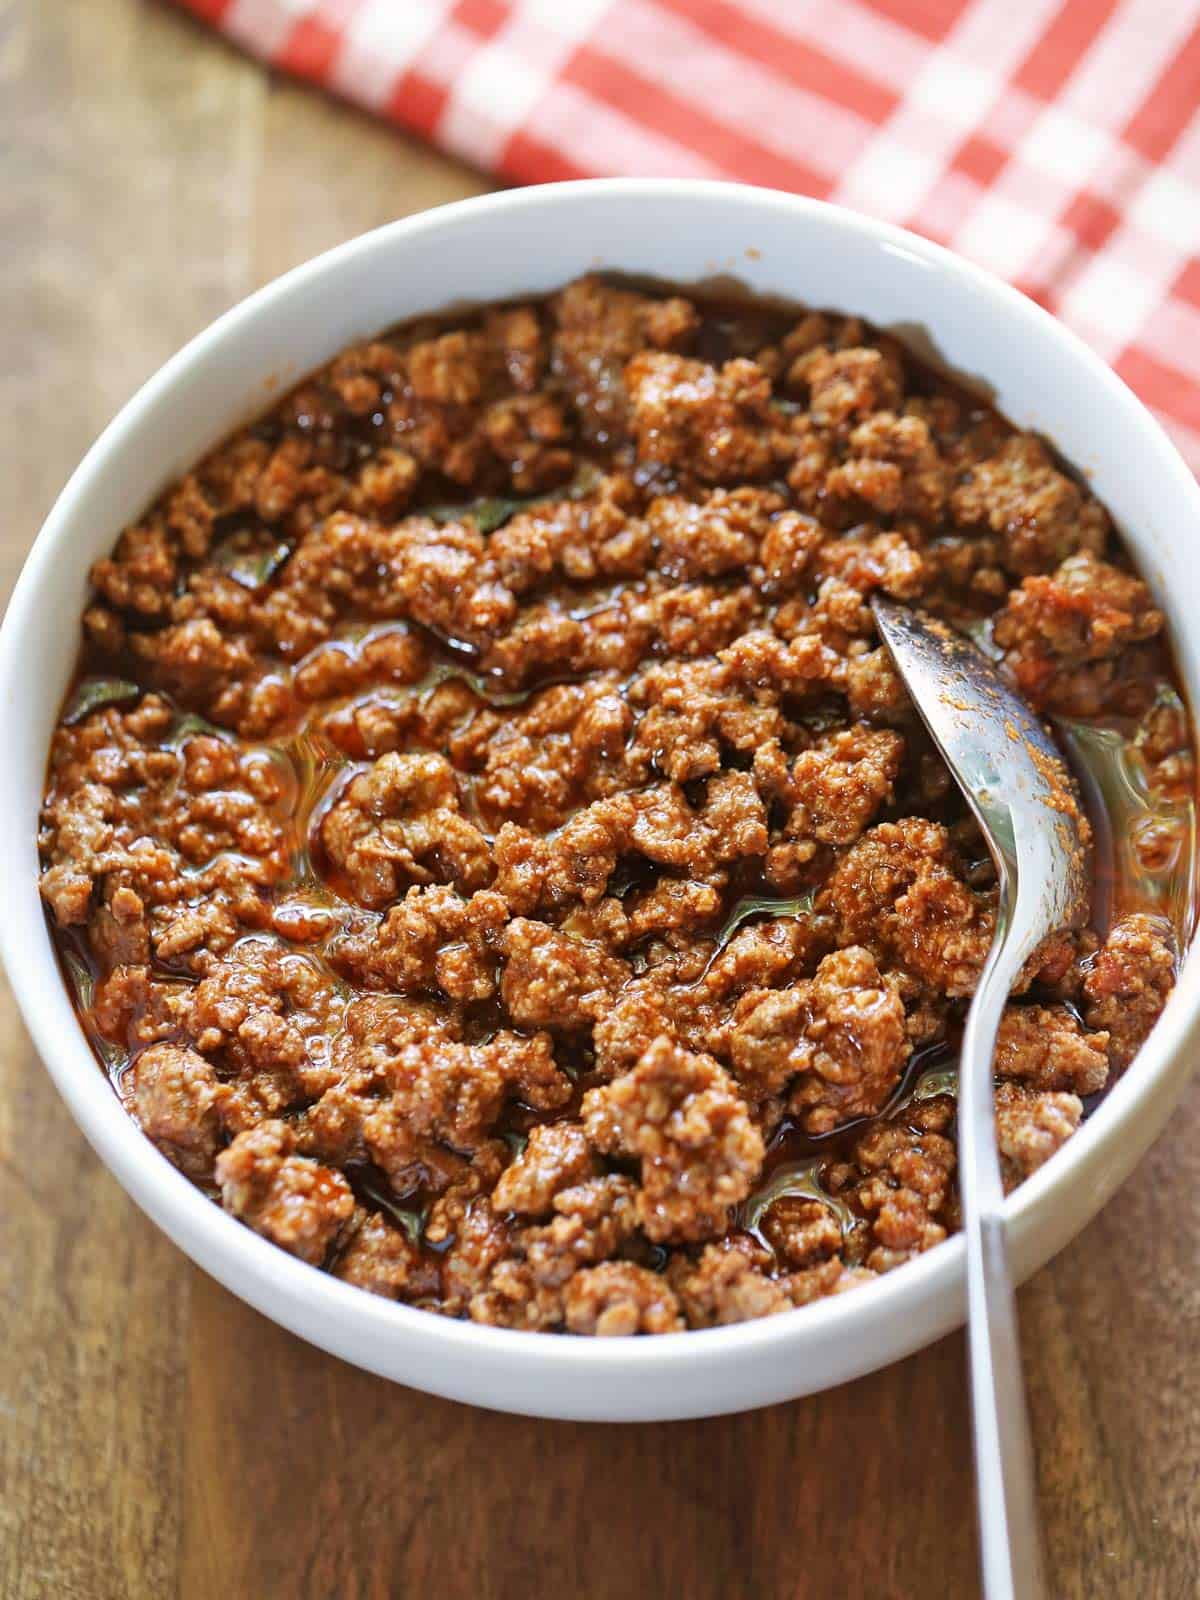 Keto sloppy joes are served in a bowl.